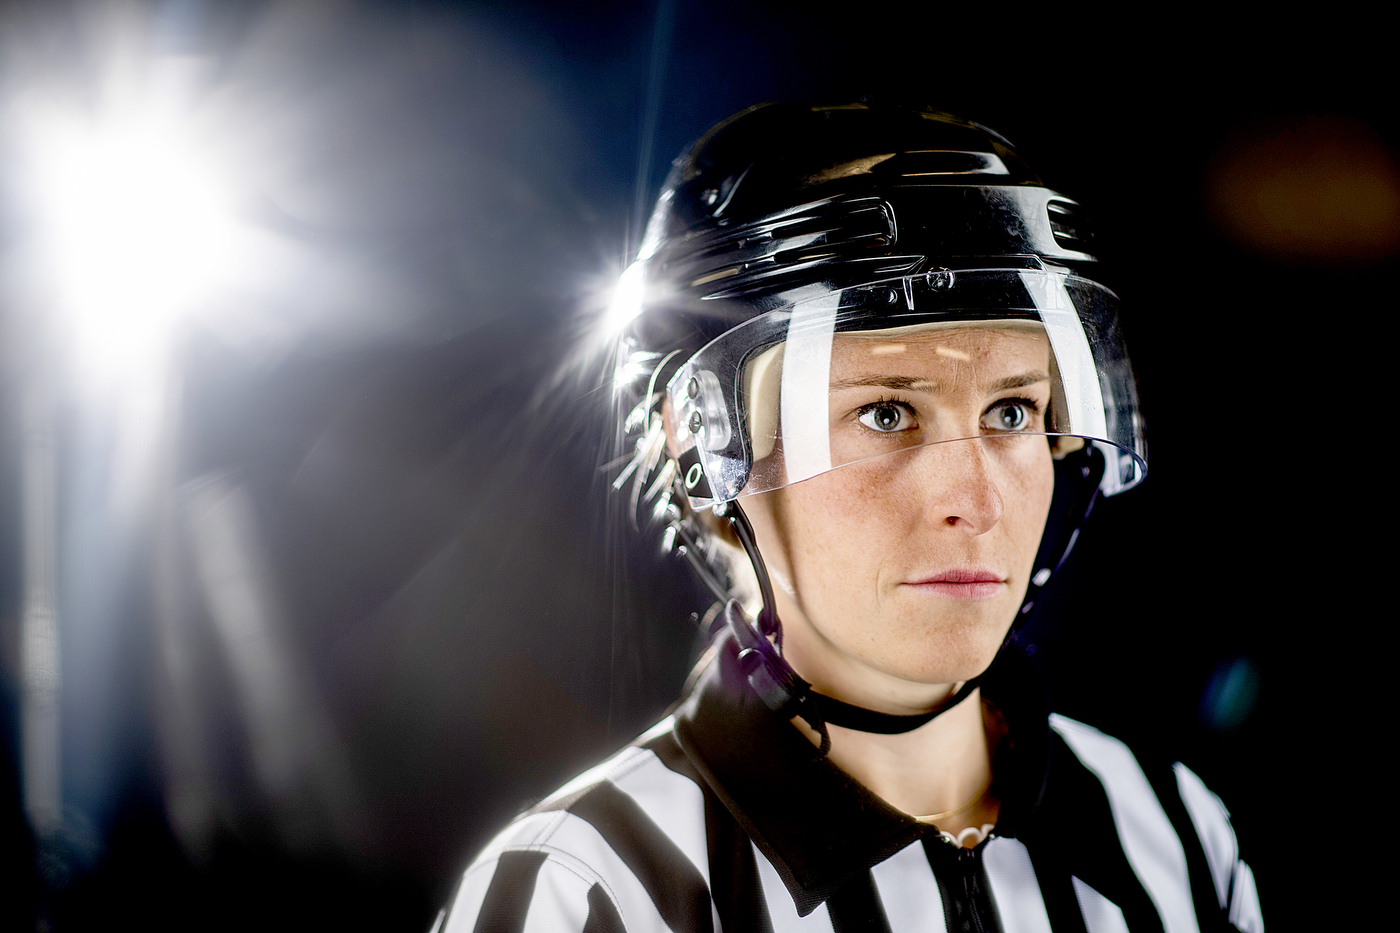 Meet the women striving to become NHL's first female officials